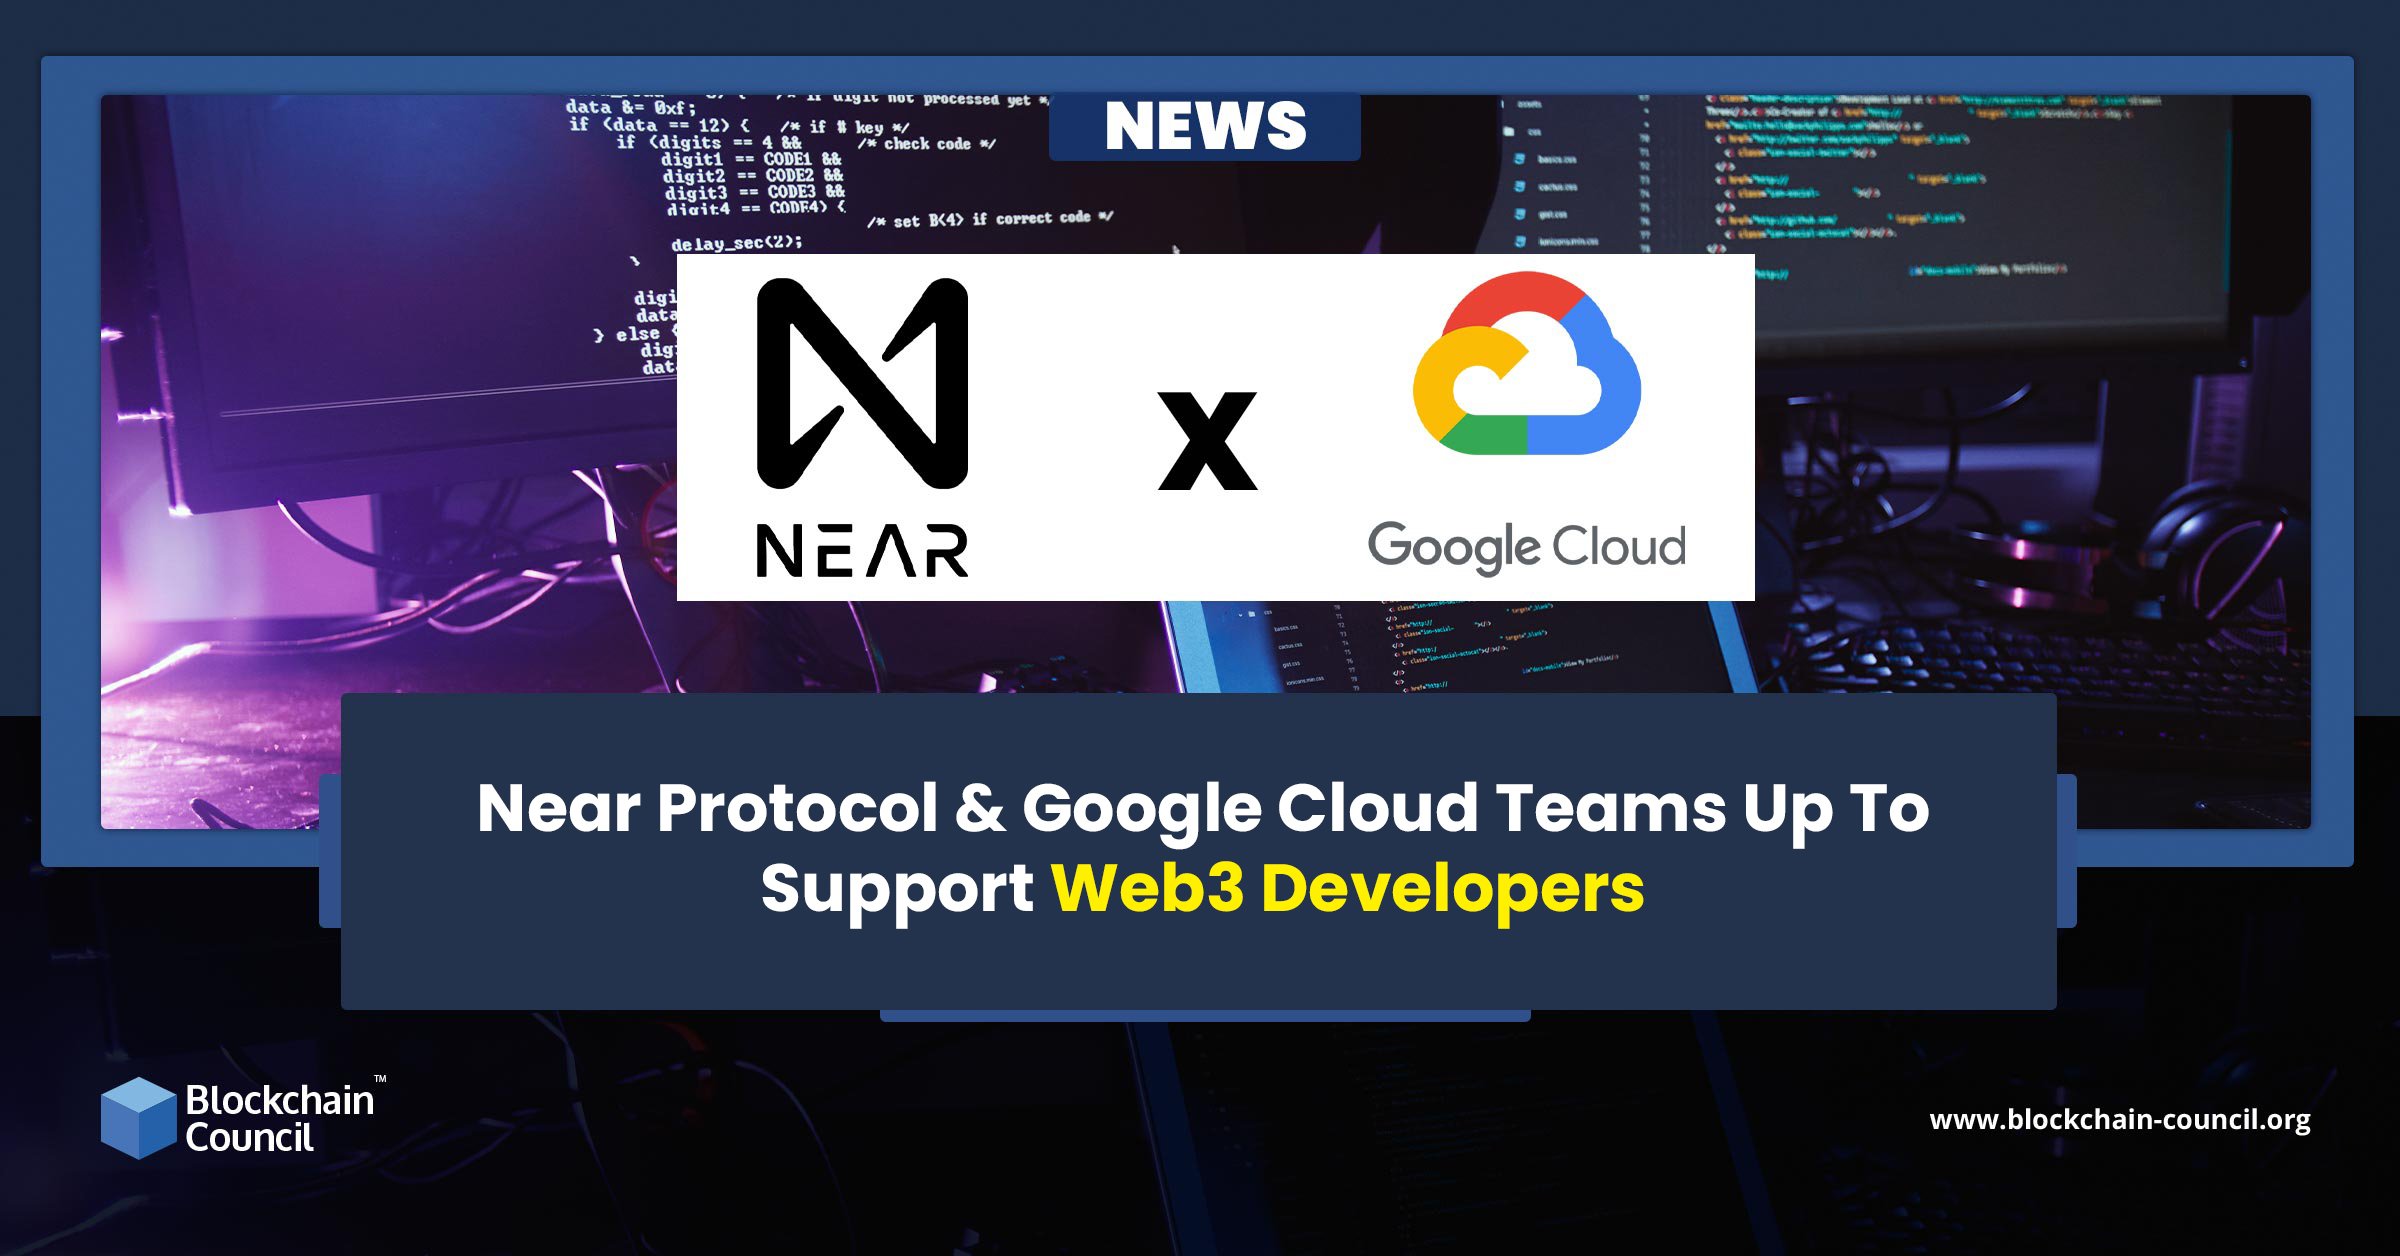 Near Protocol & Google Cloud Teams Up To Support Web3 Developers